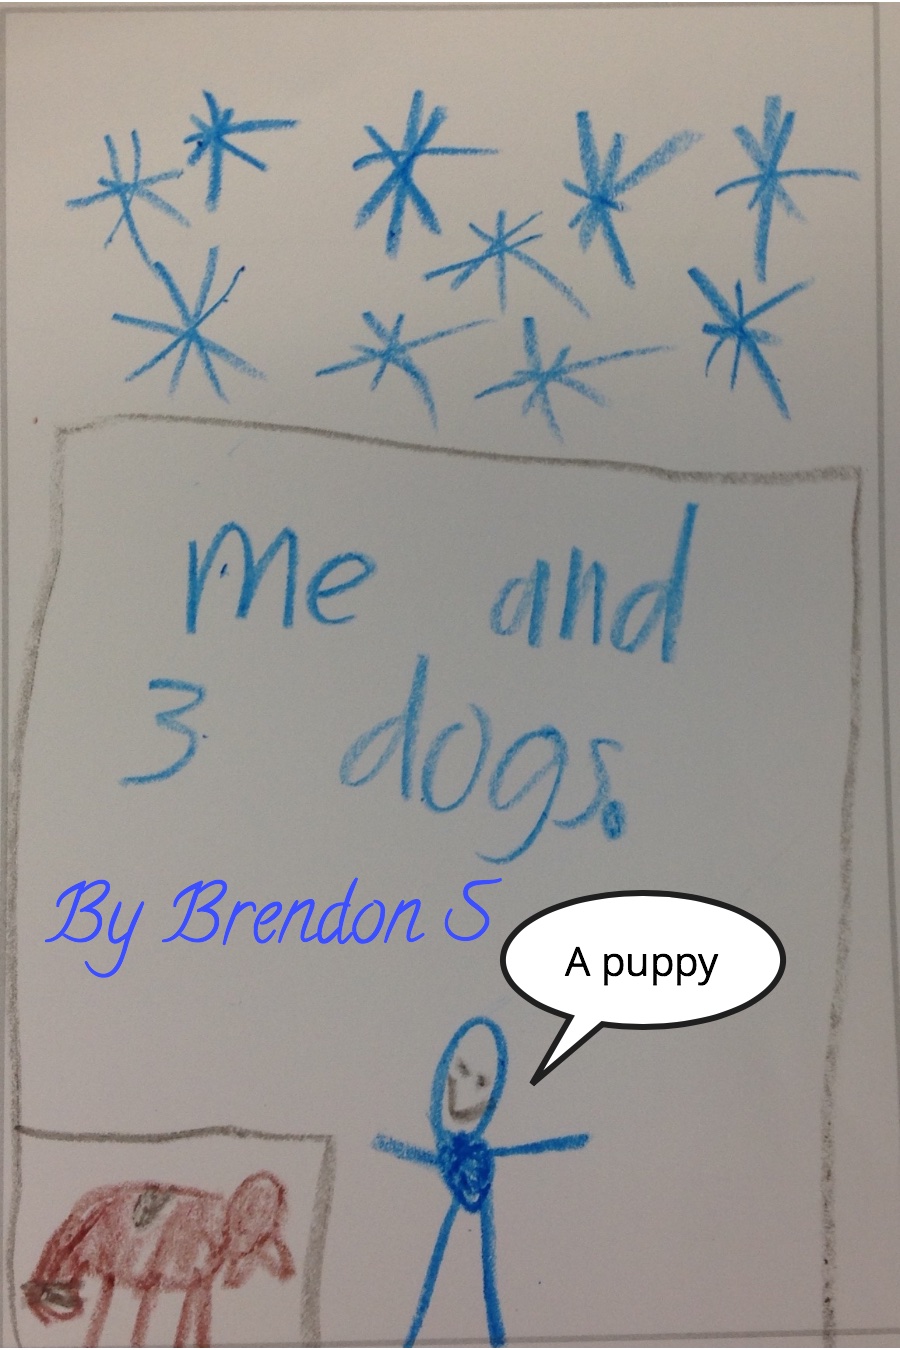 Me and 3 Dogs by Brendon S